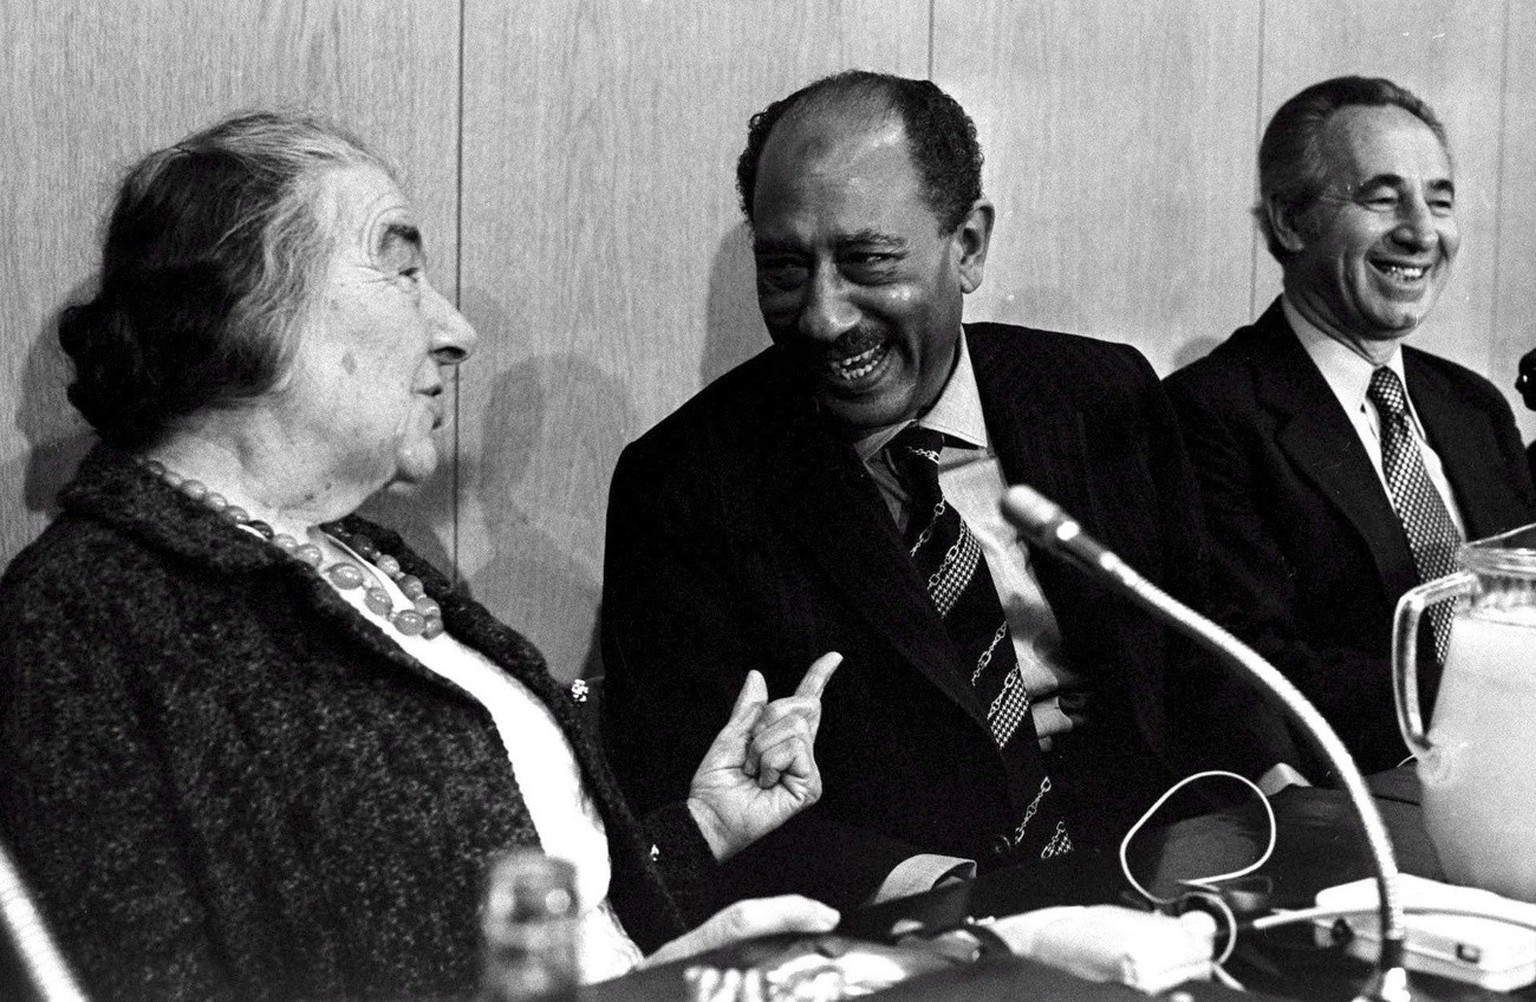 Photograph dated 21 November 1977 of Egyptian President Anwar Sadat (C) as he meets with Golda Meir (L) and Shimon Peres (R) of the Alignment faction in the Knesset, during Sadat&#039;s historic visit ...